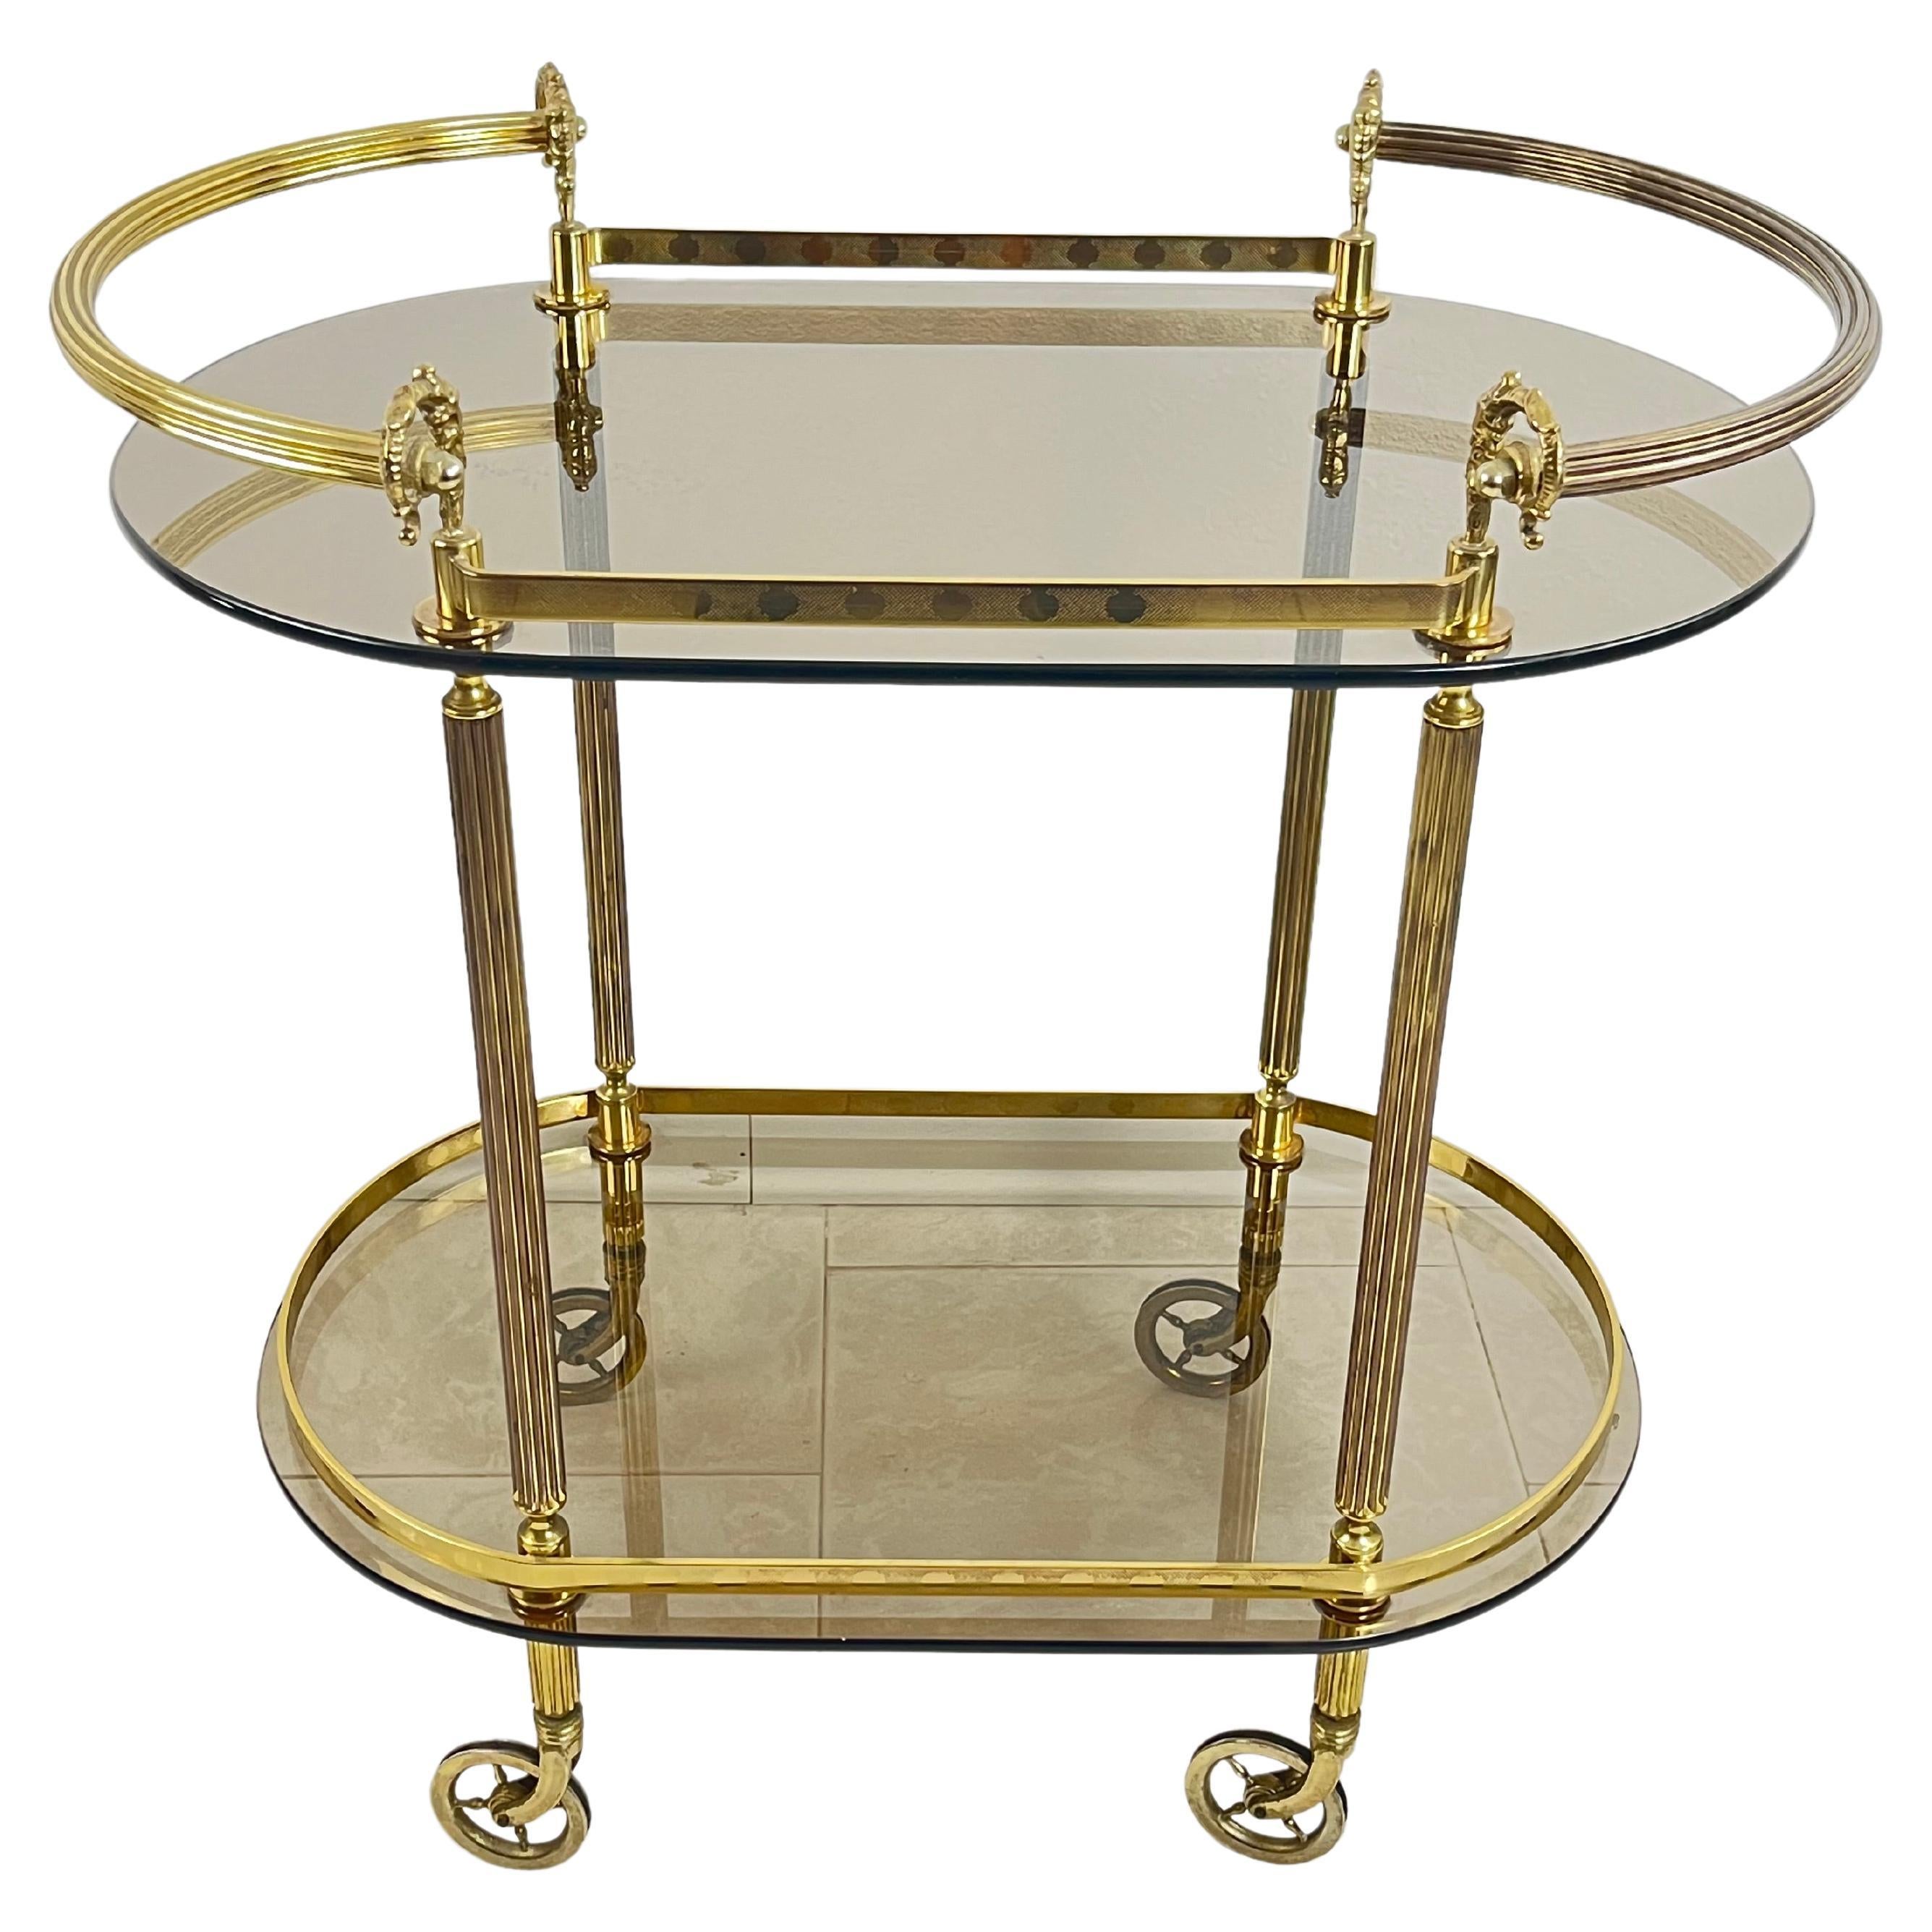 Mid-Century Oval Bar Cart in Brass And Smoked Glass 1950s Italian Design